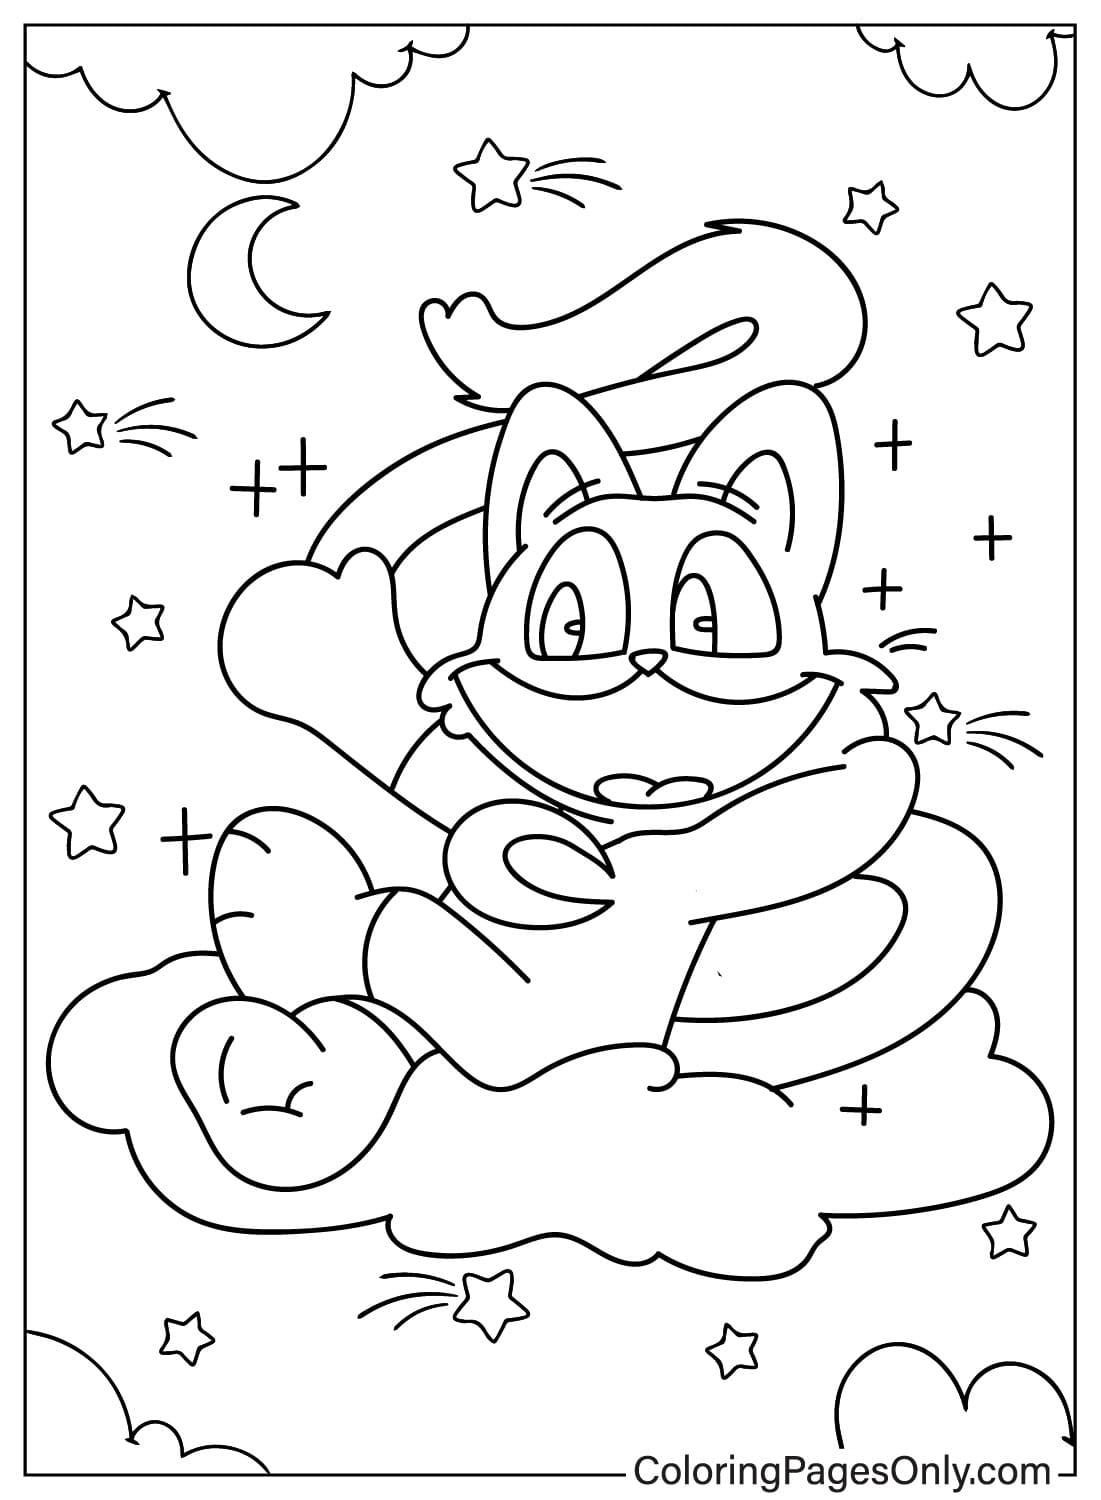 44 Free Printable Smiling Critters Coloring Pages